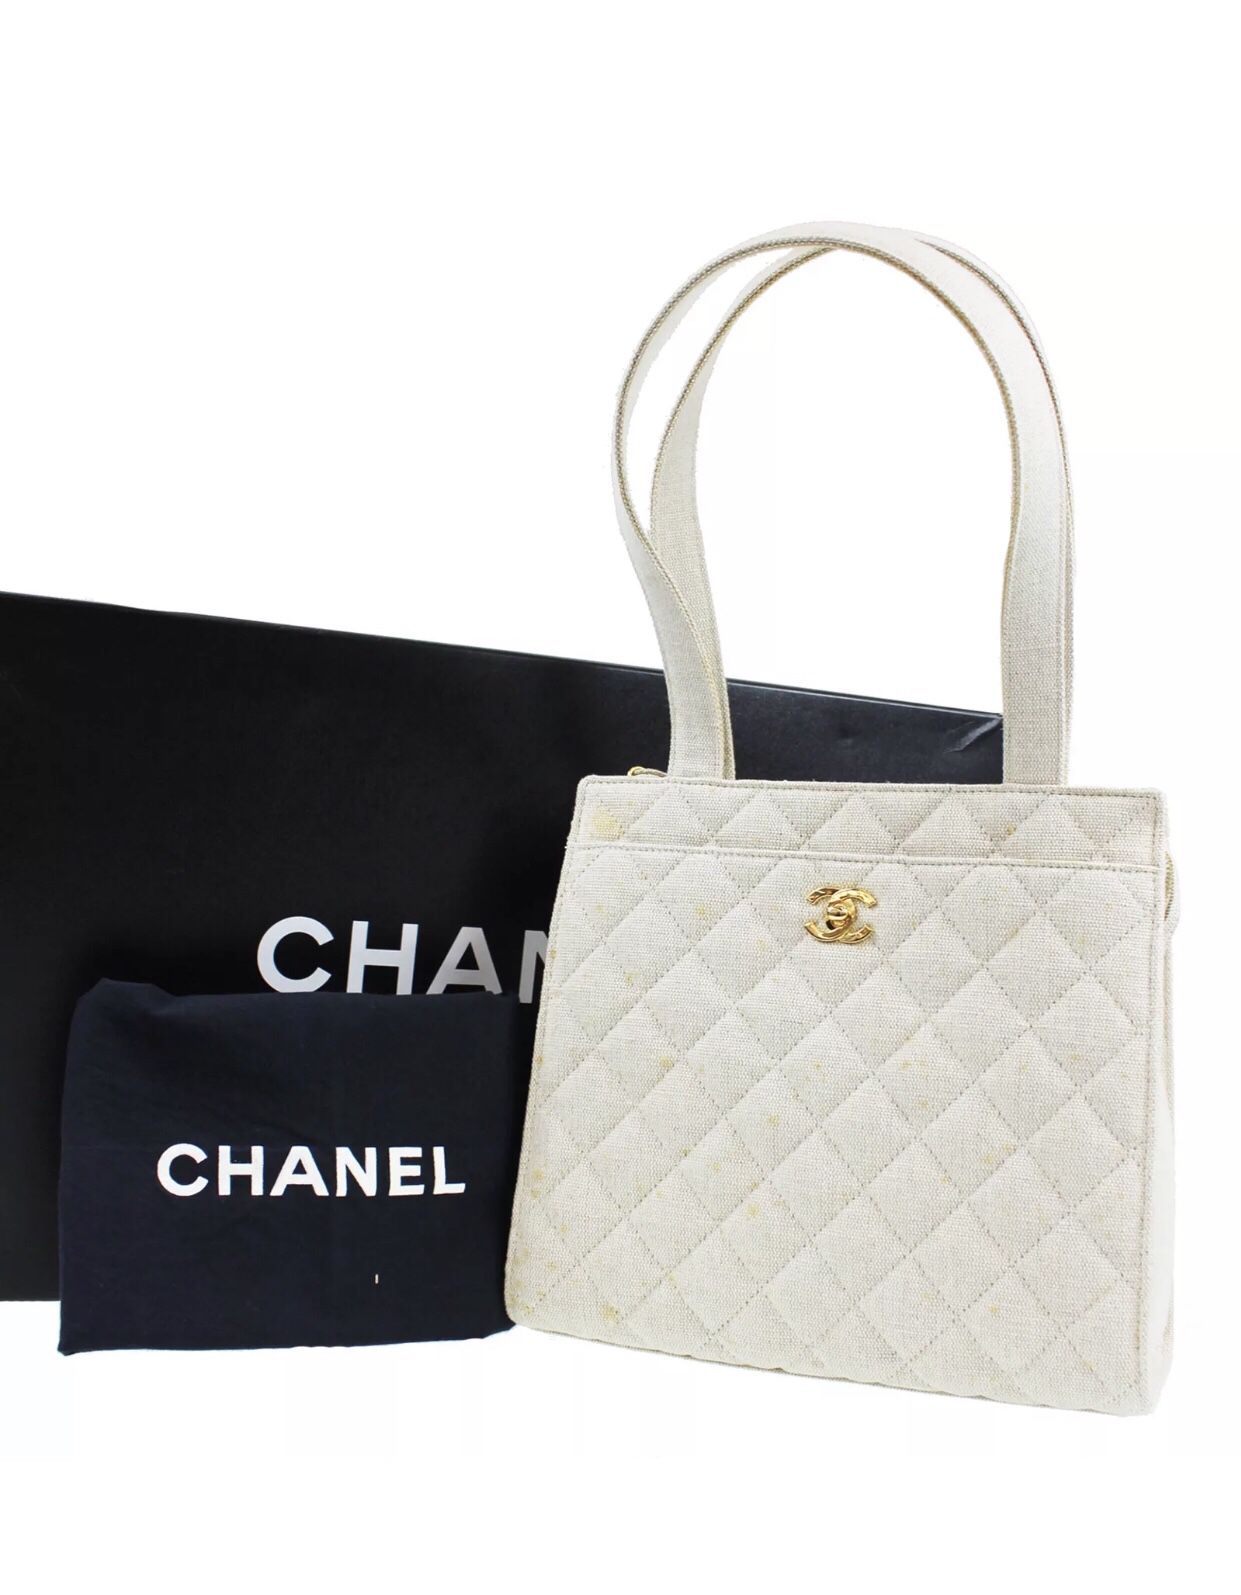 Lovely authentic Chanel Quilted Linen Handbag